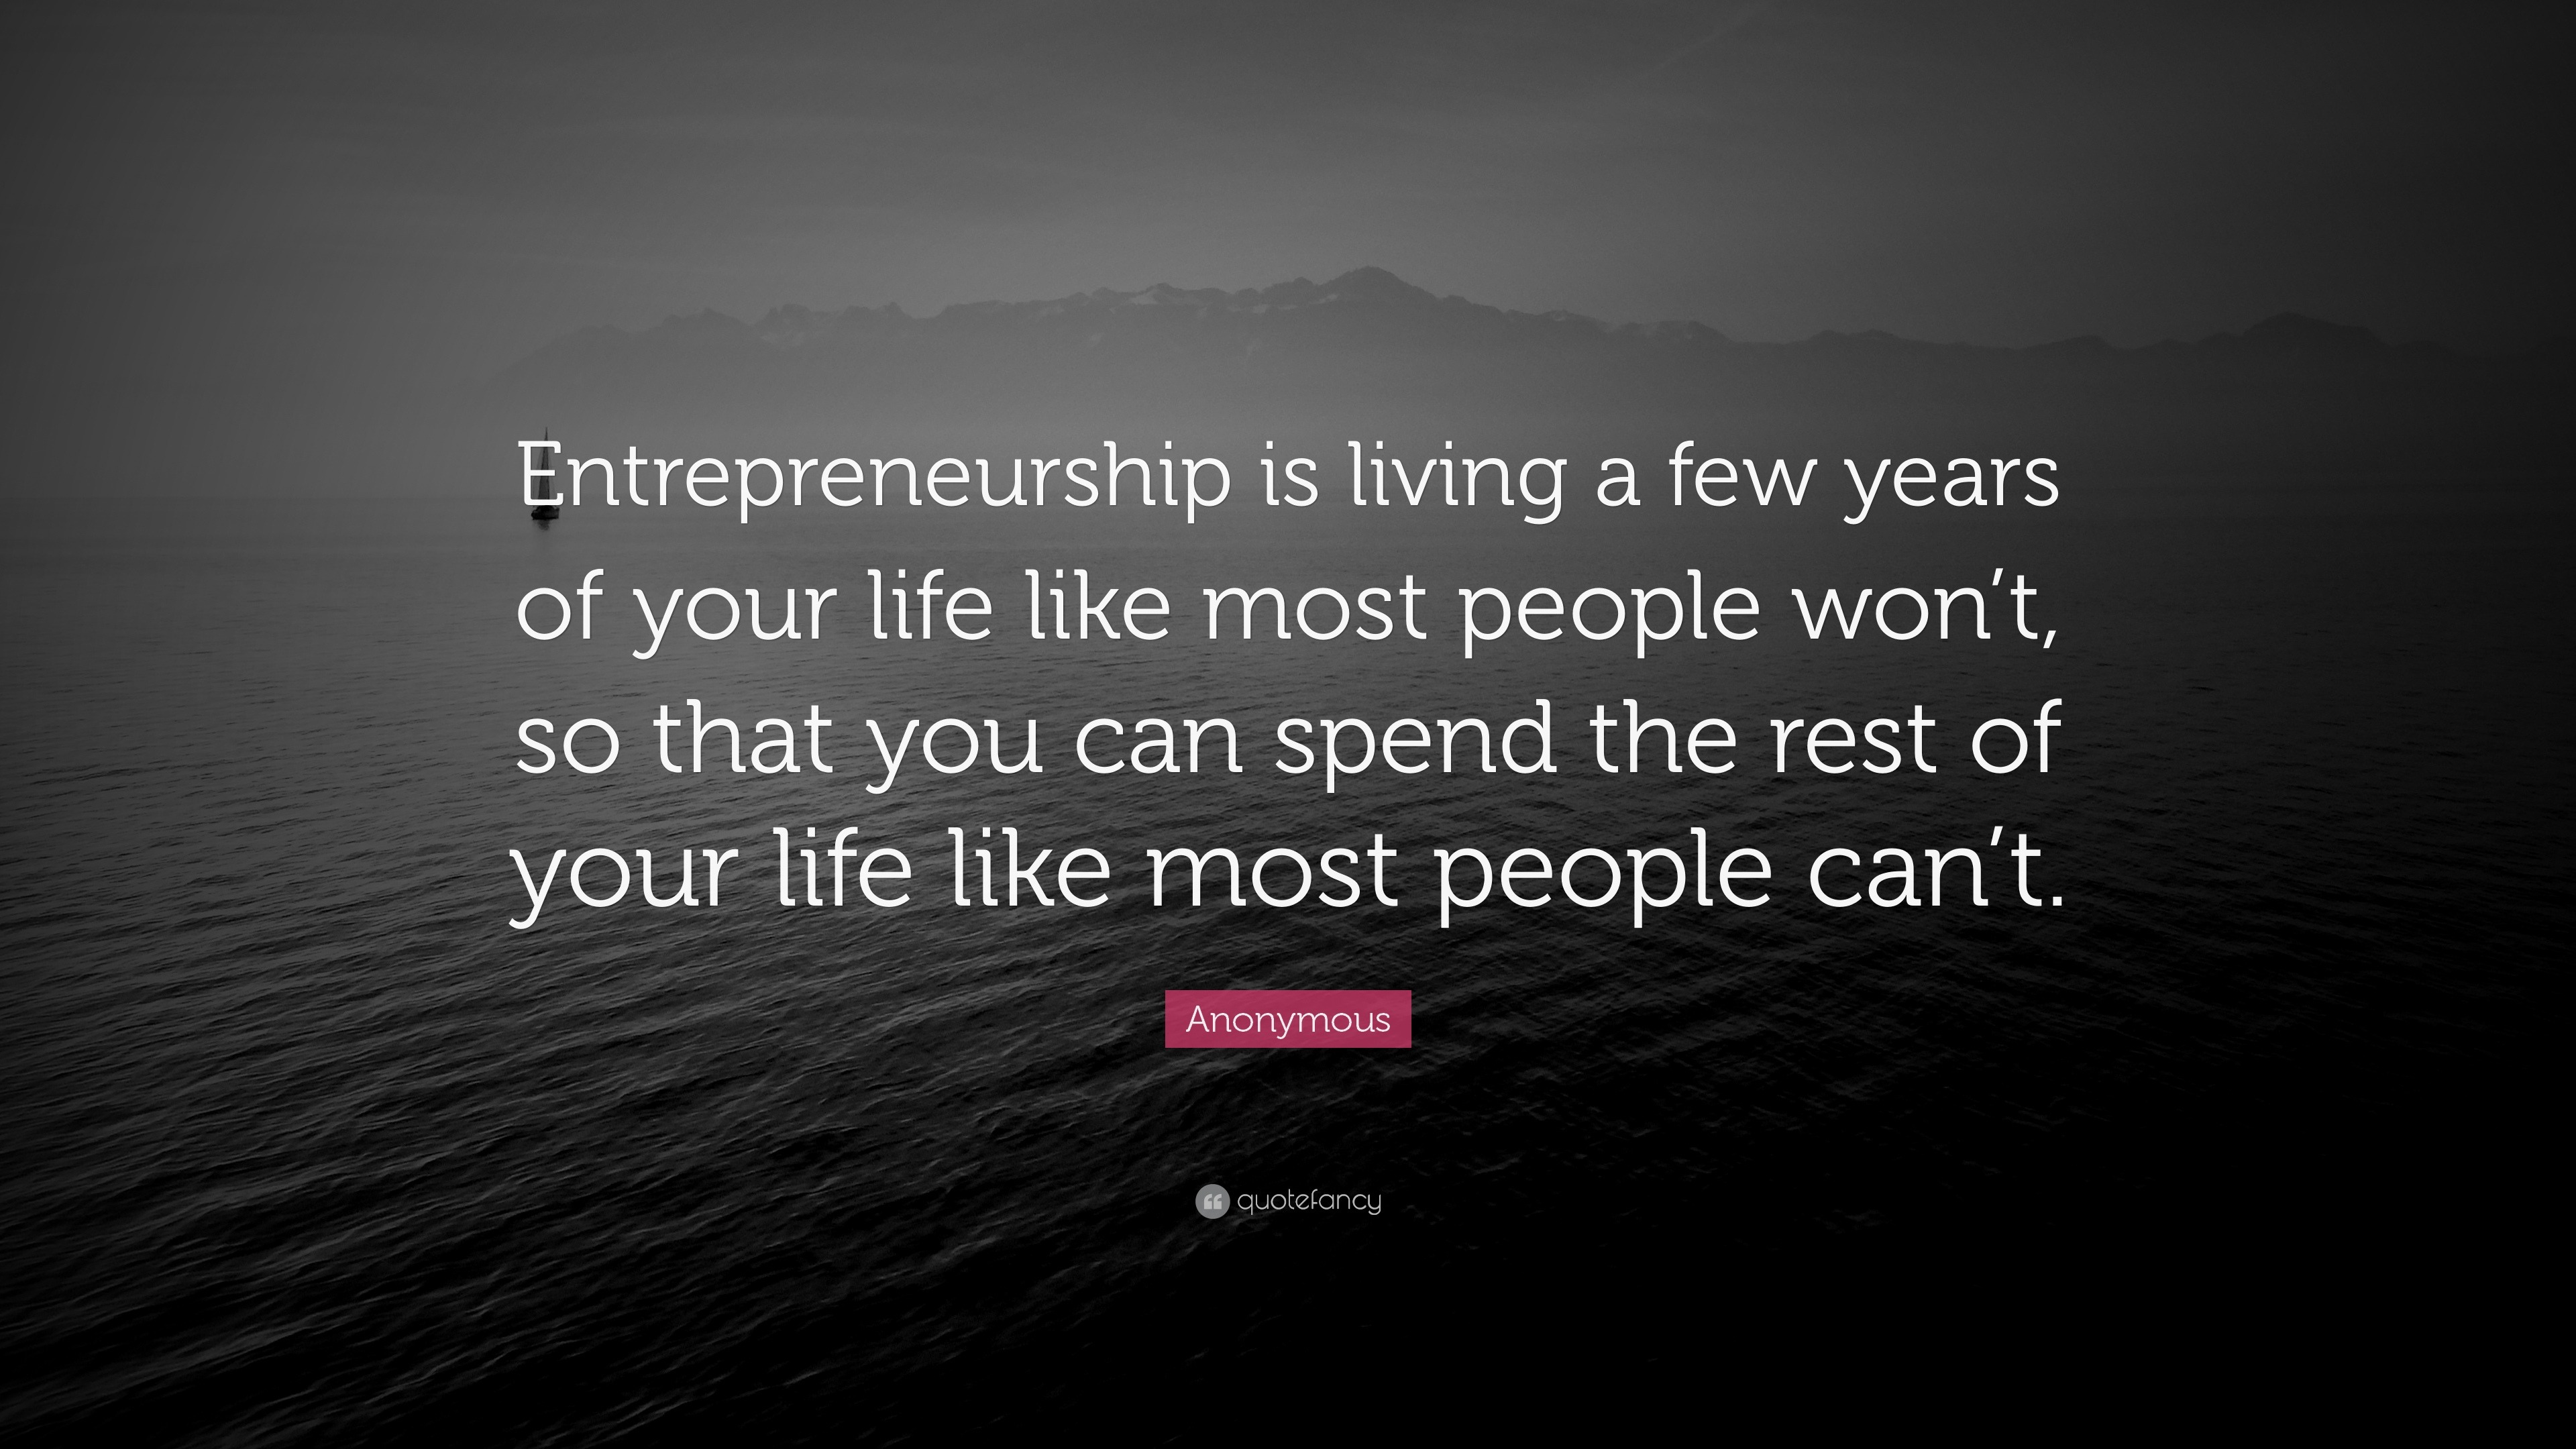 Anonymous Quote: “Entrepreneurship is living a few years of your life